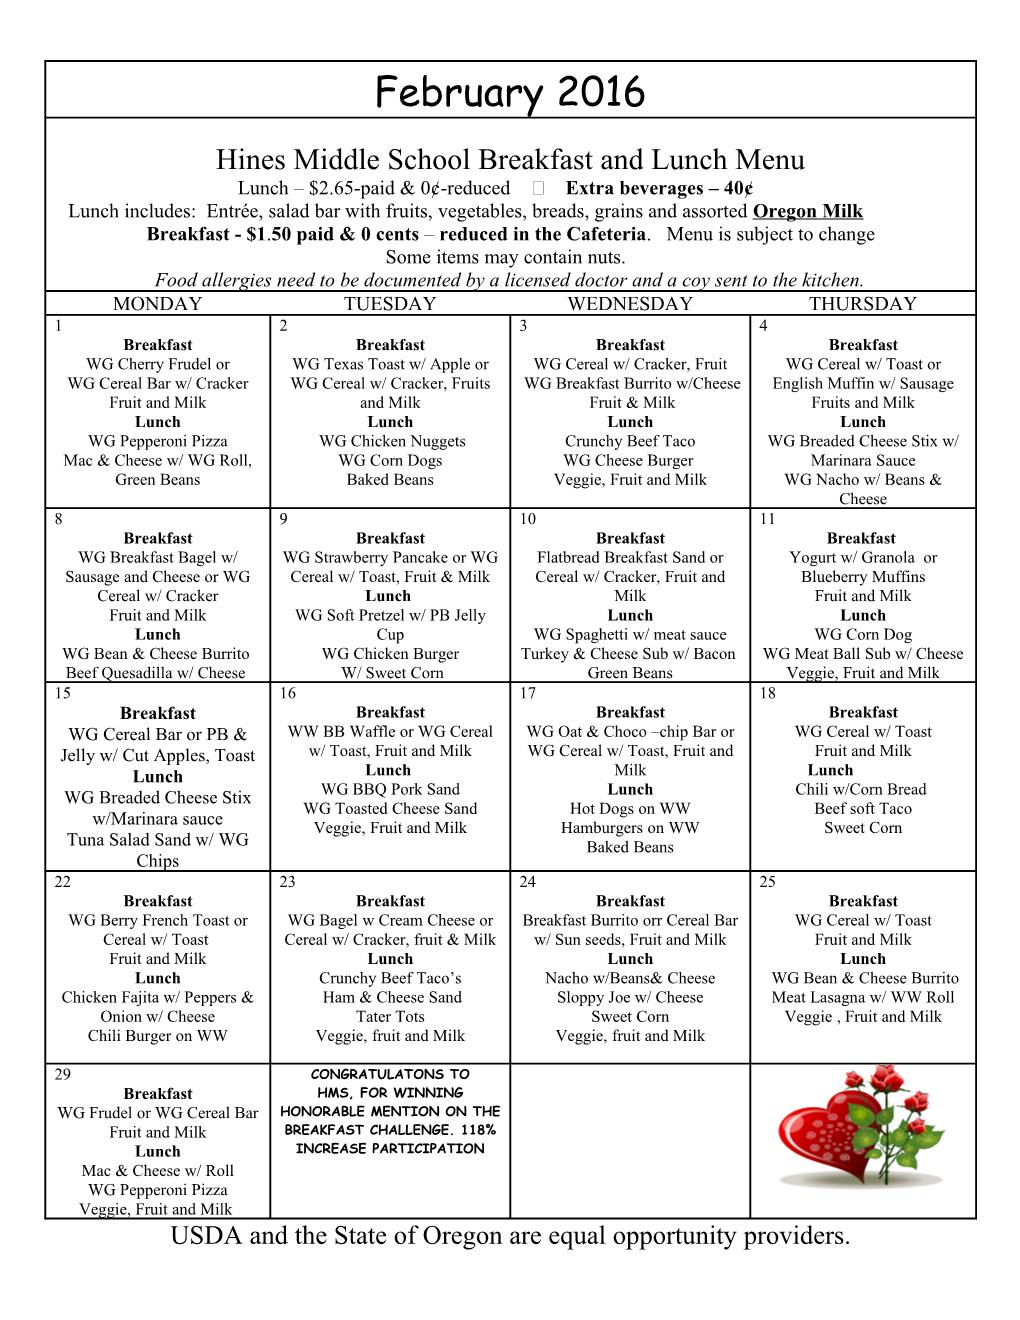 Hines Middle School Breakfast and Lunch Menu